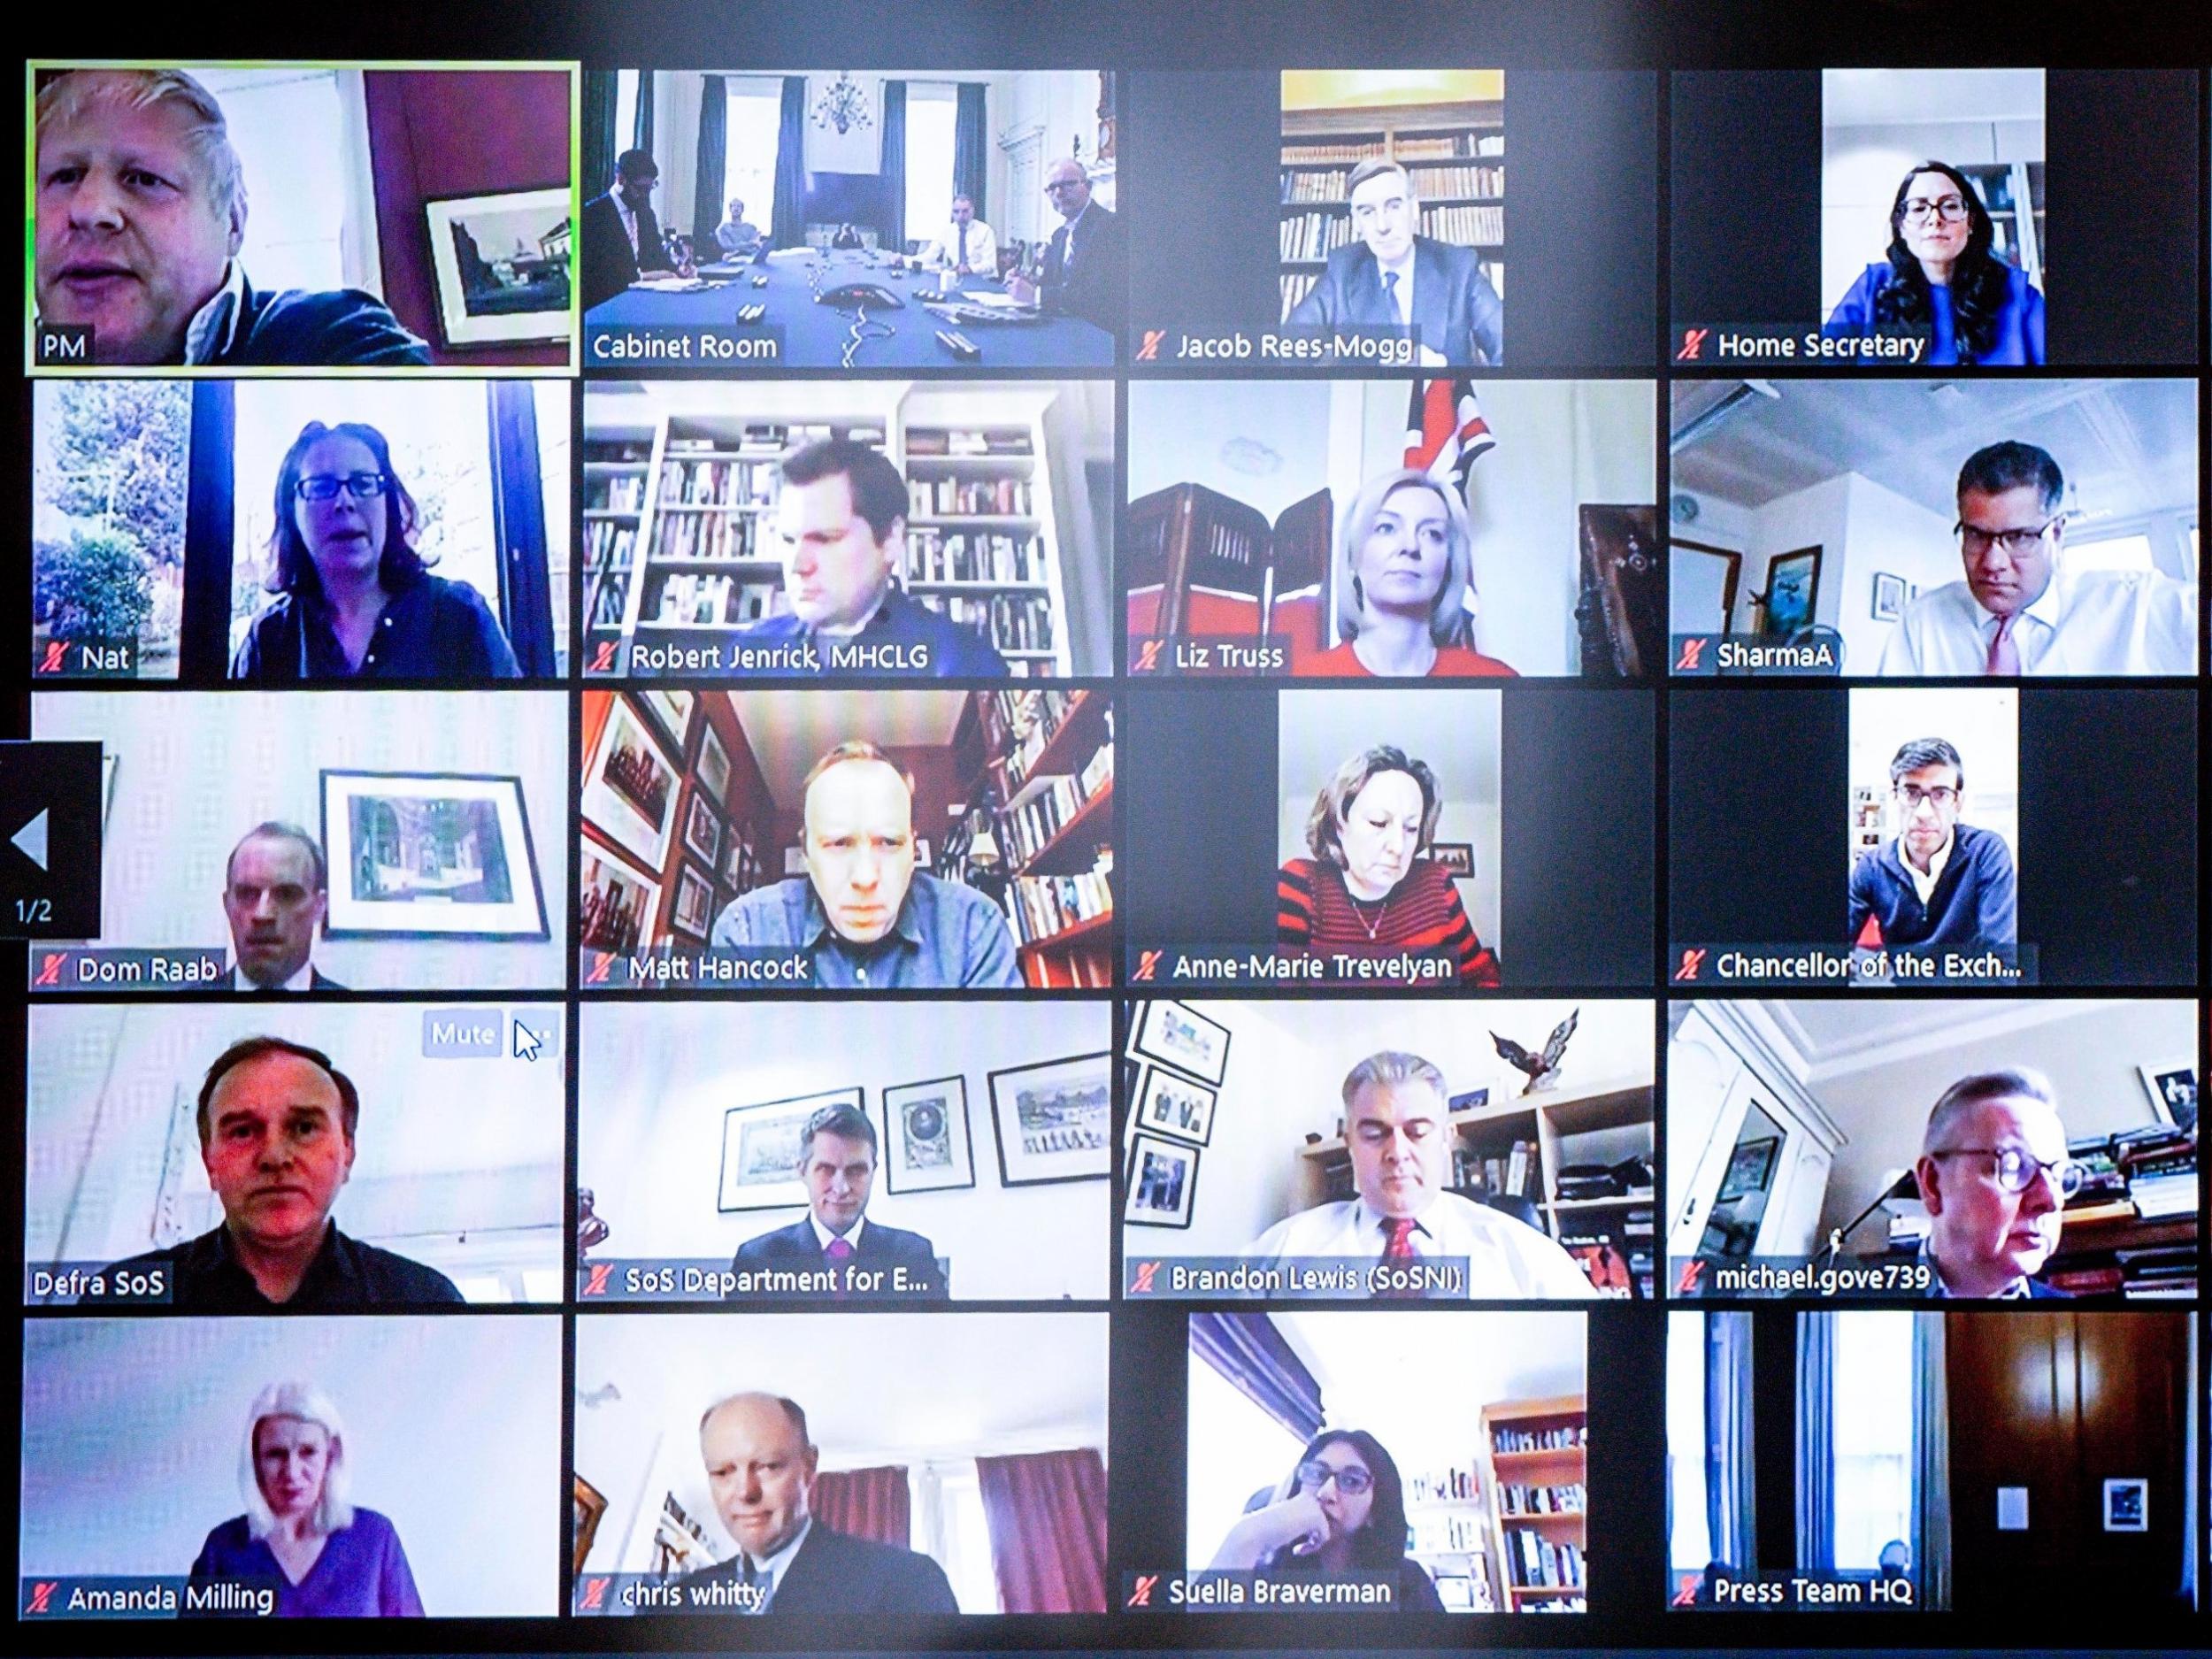 Video conference app Zoom has been used for cabinet meetings by the UK government during the coronavirus lockdown